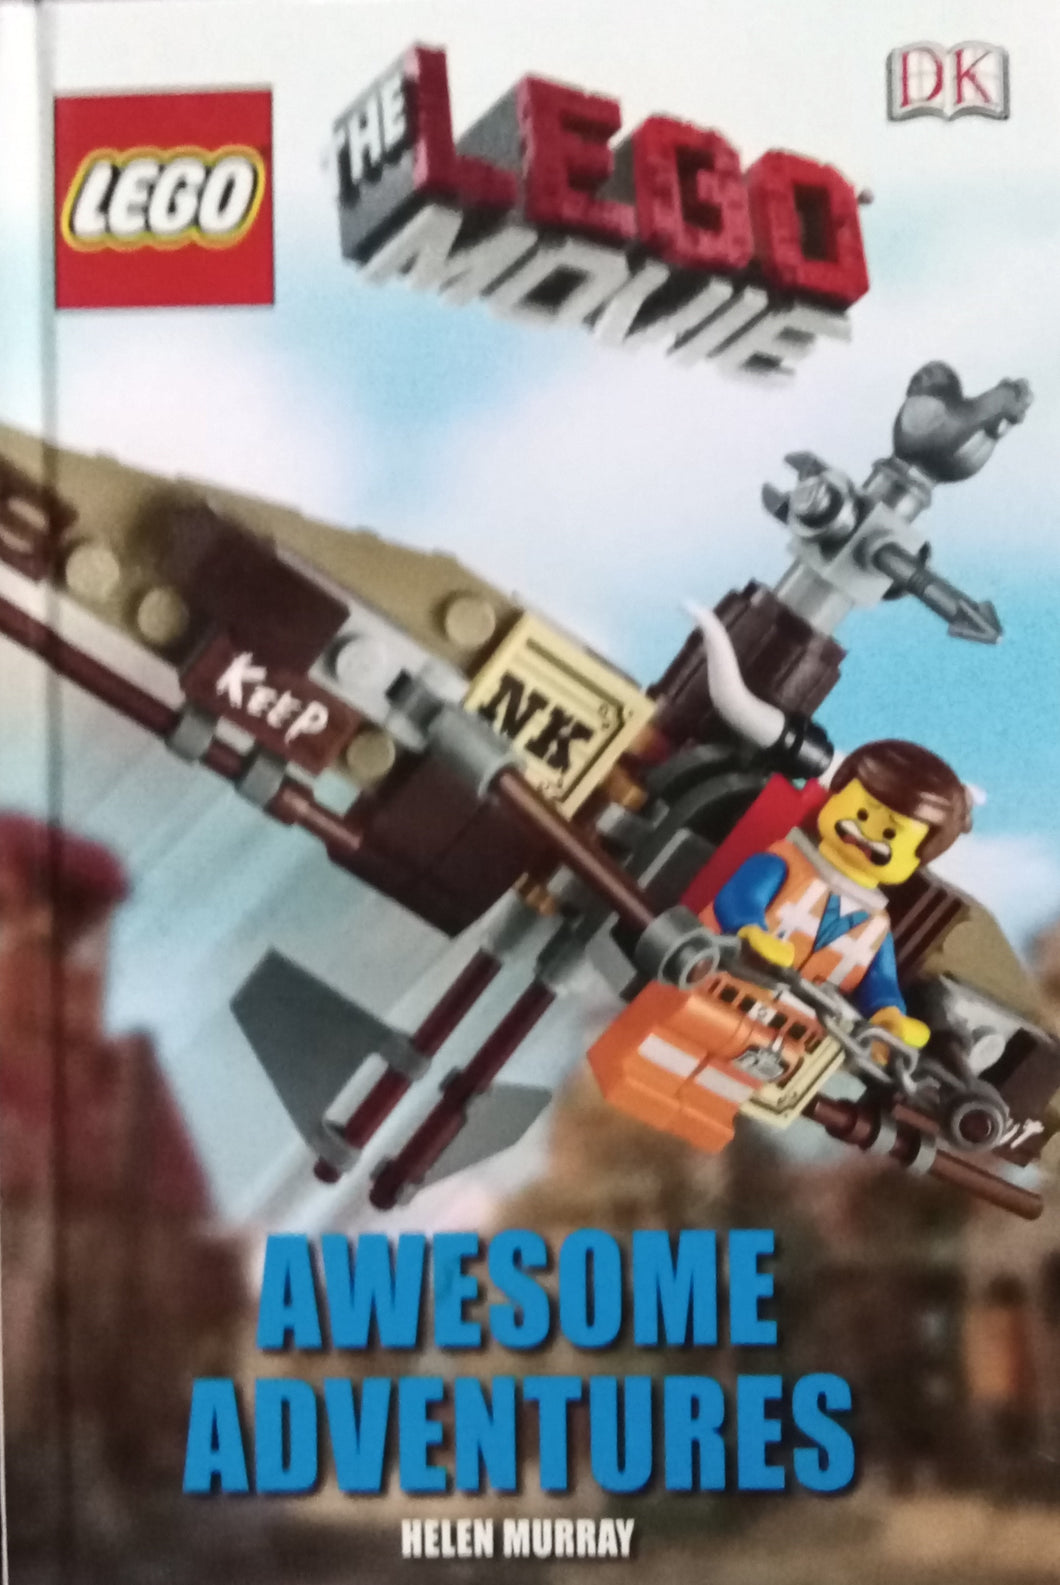 The Lego Movue Awesome Adventures by Helen Murray